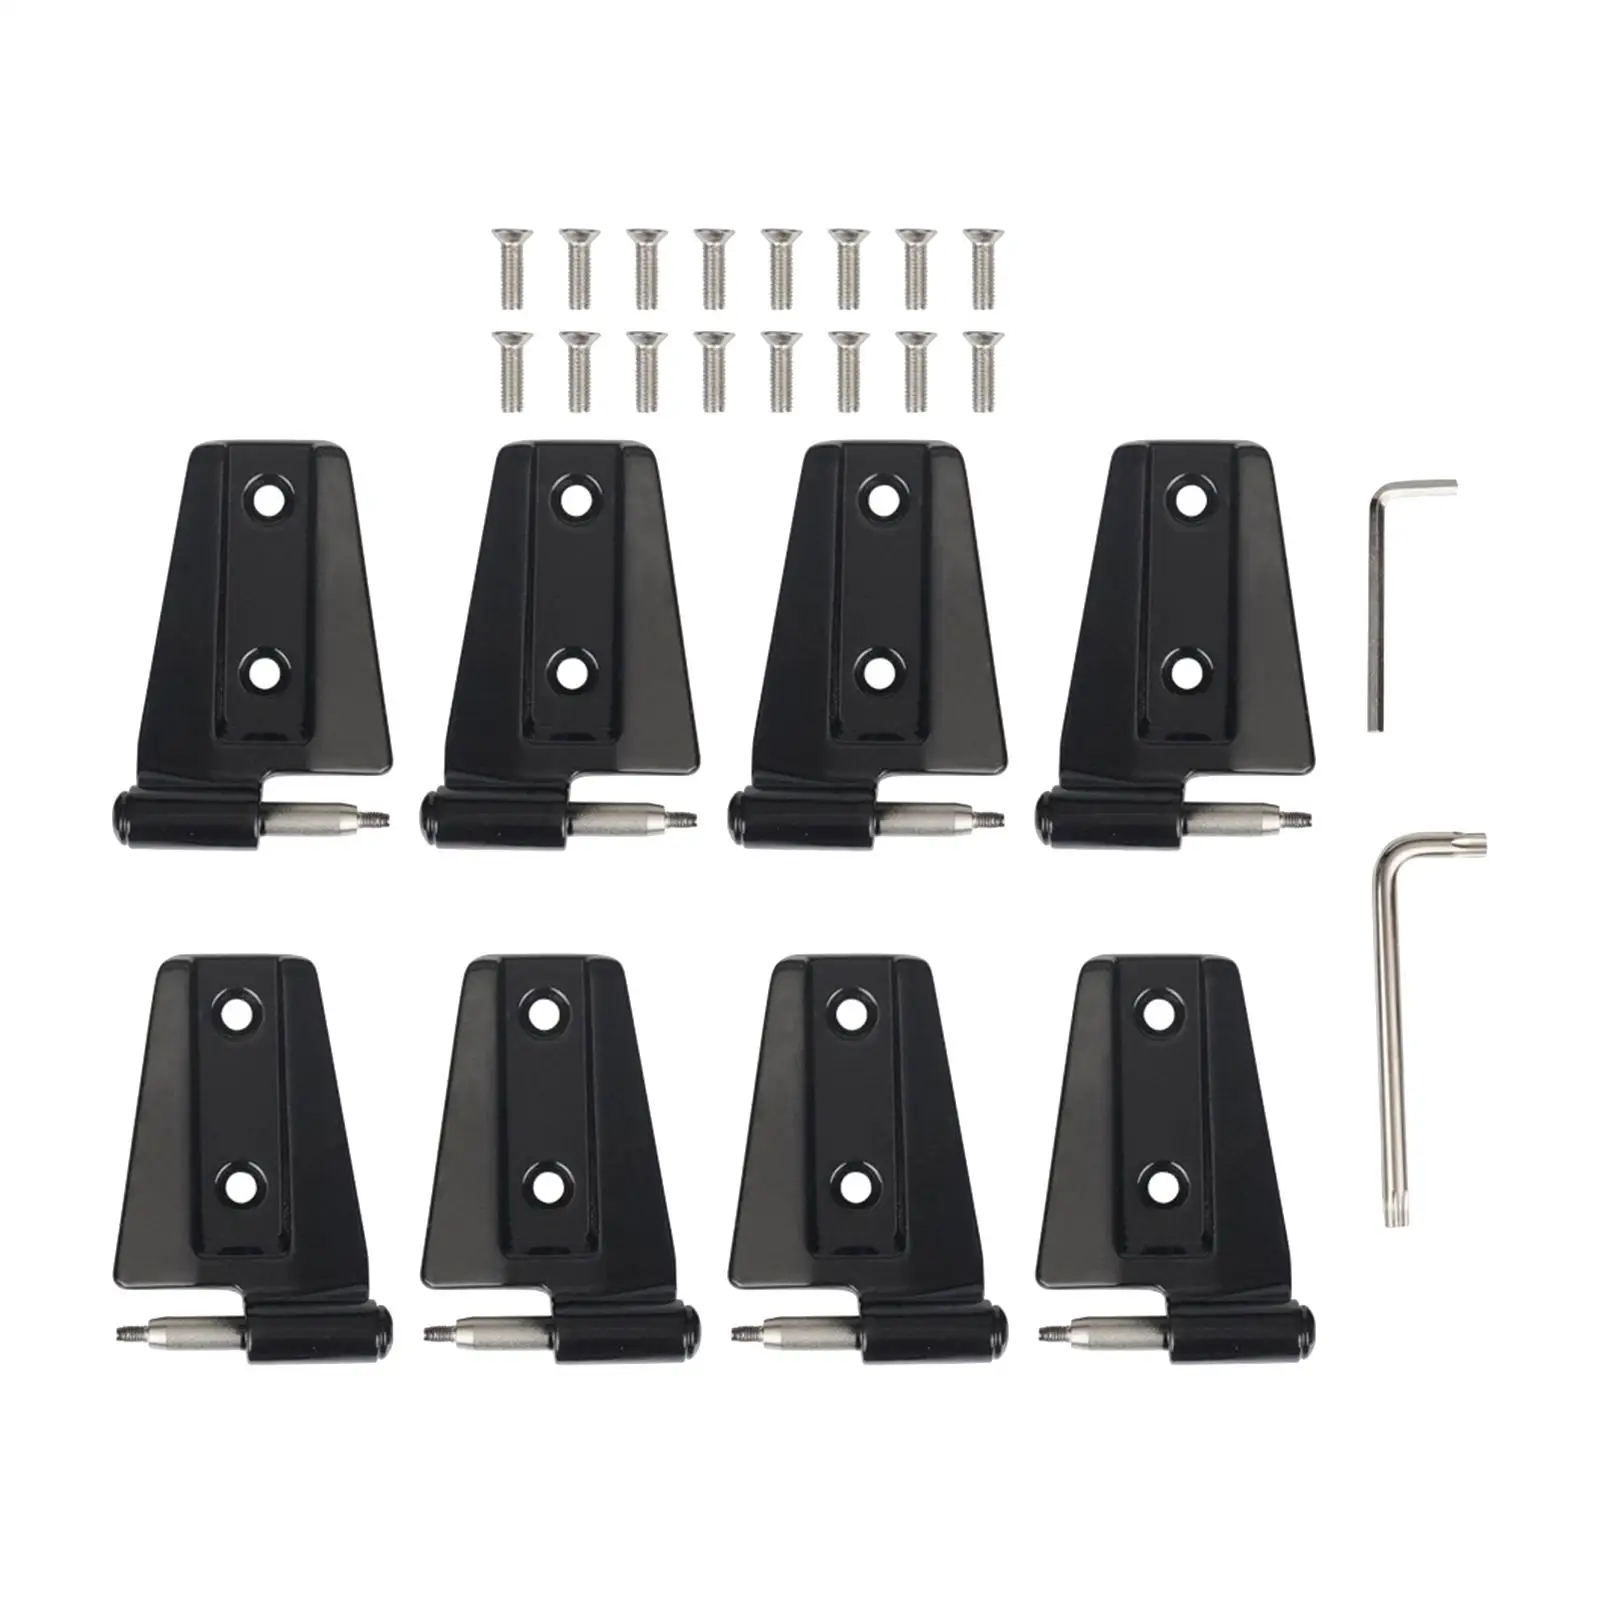 

4 Door Hinge Assembly Kit 55395384 Stable Performance Heavy Duty Replace Parts Automotive for Jeep Wrangler JK 2007 - 2018